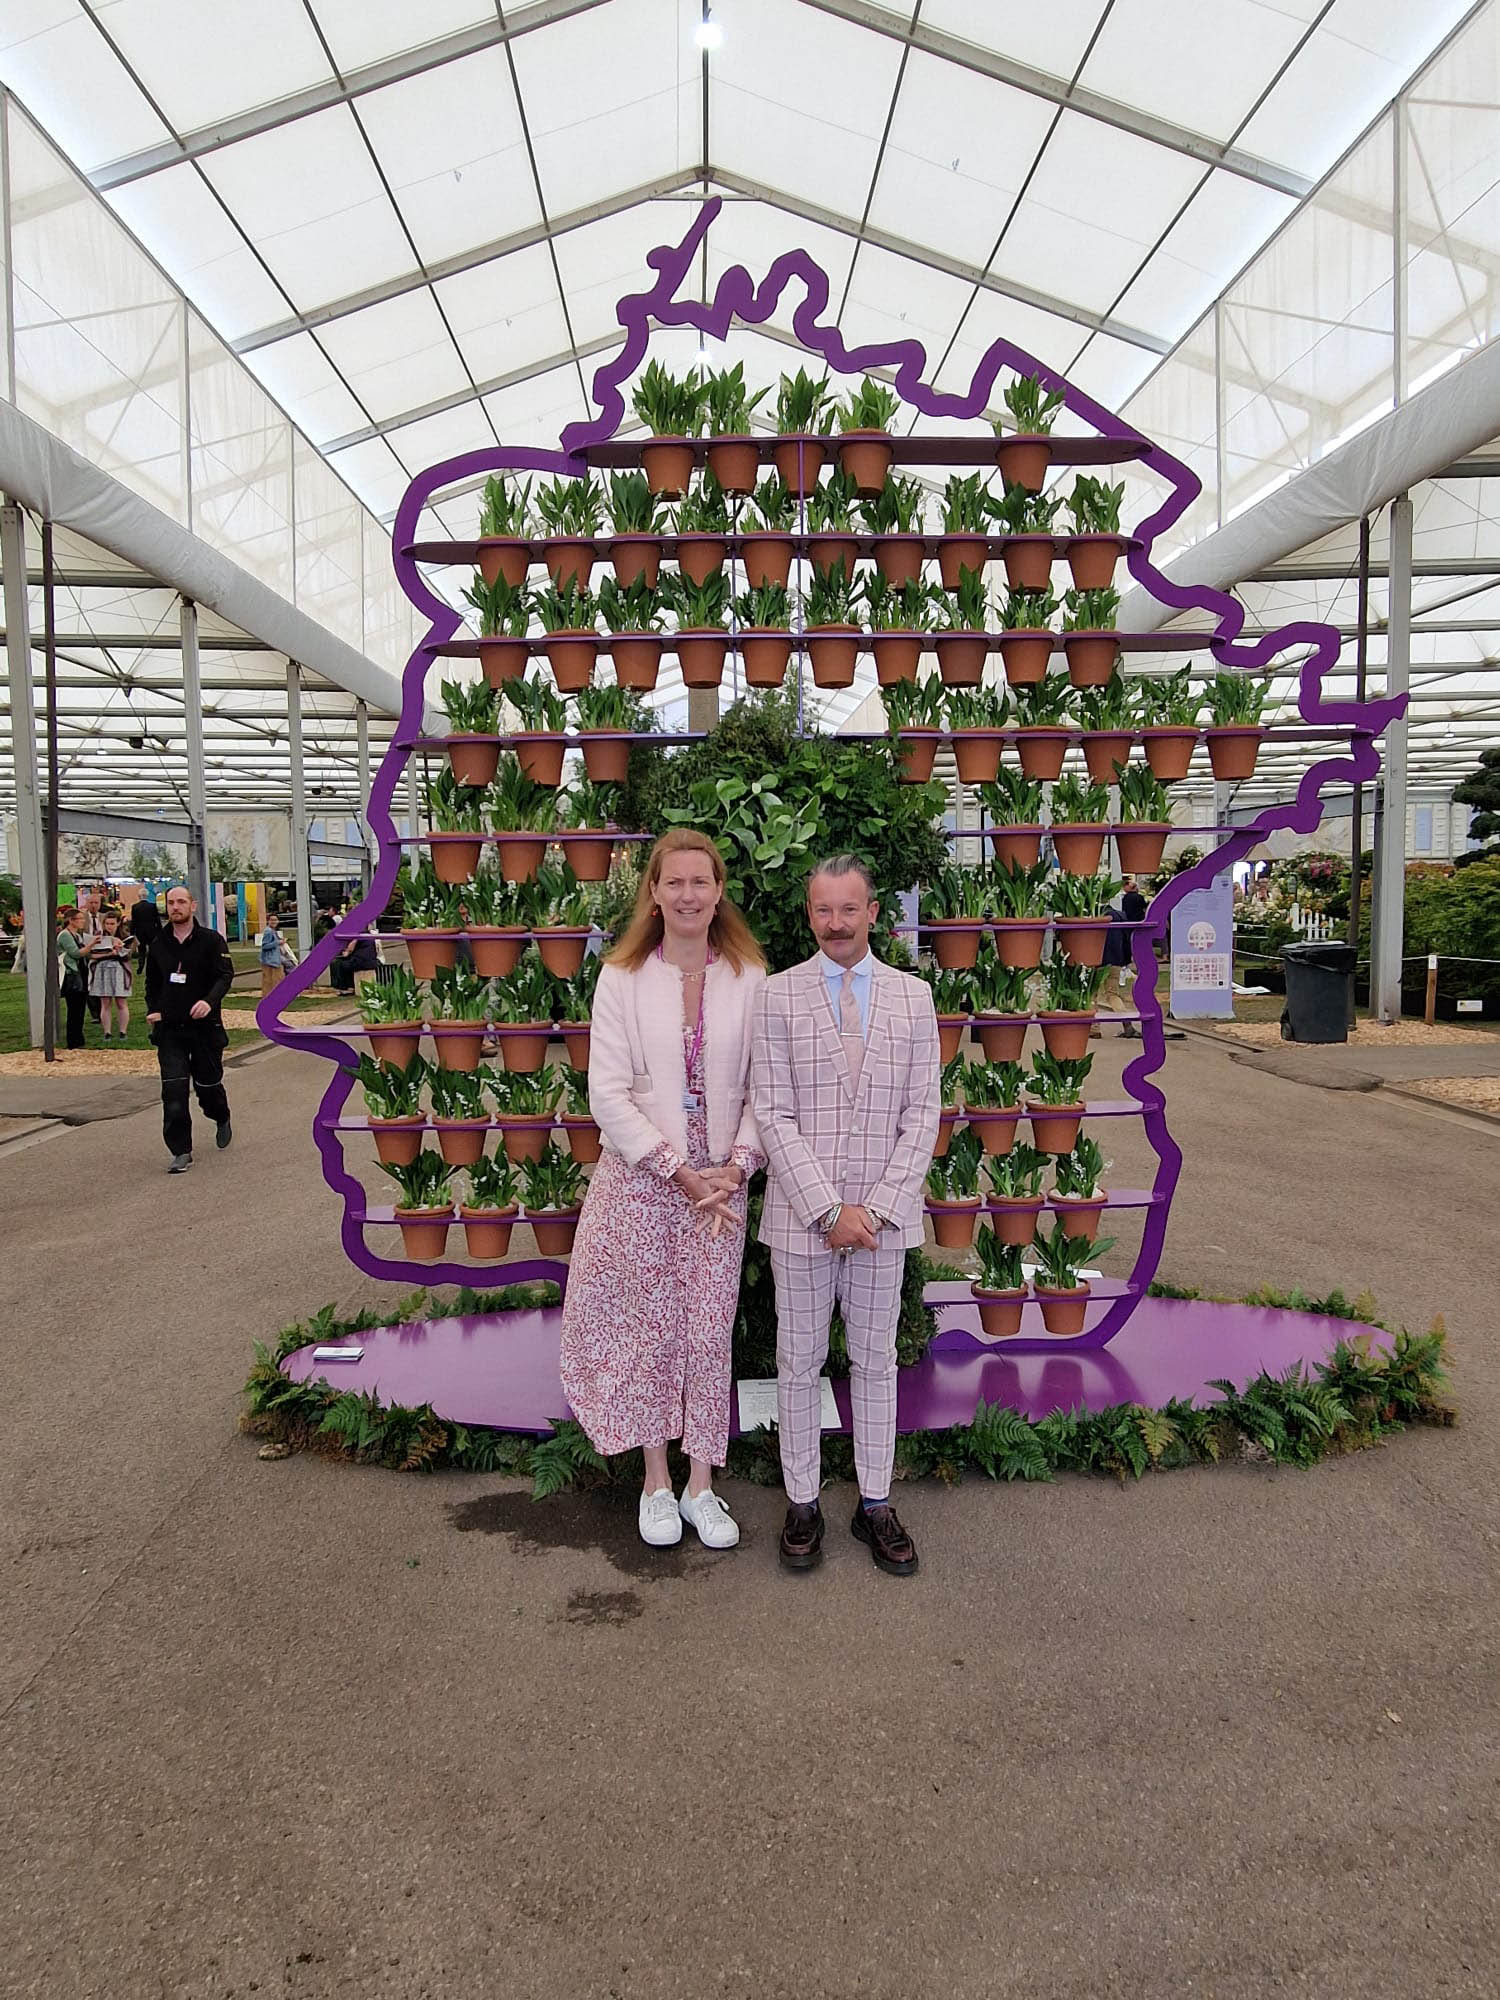 Simon Lycett garden designer standing in front of his amazing 3D silhouette portrait of the Queen made from foliage and 70 pots of HRM favourite flower Lilly of the valley representing 70 years on the thrown as part of the jubilee celebrations in the gardens